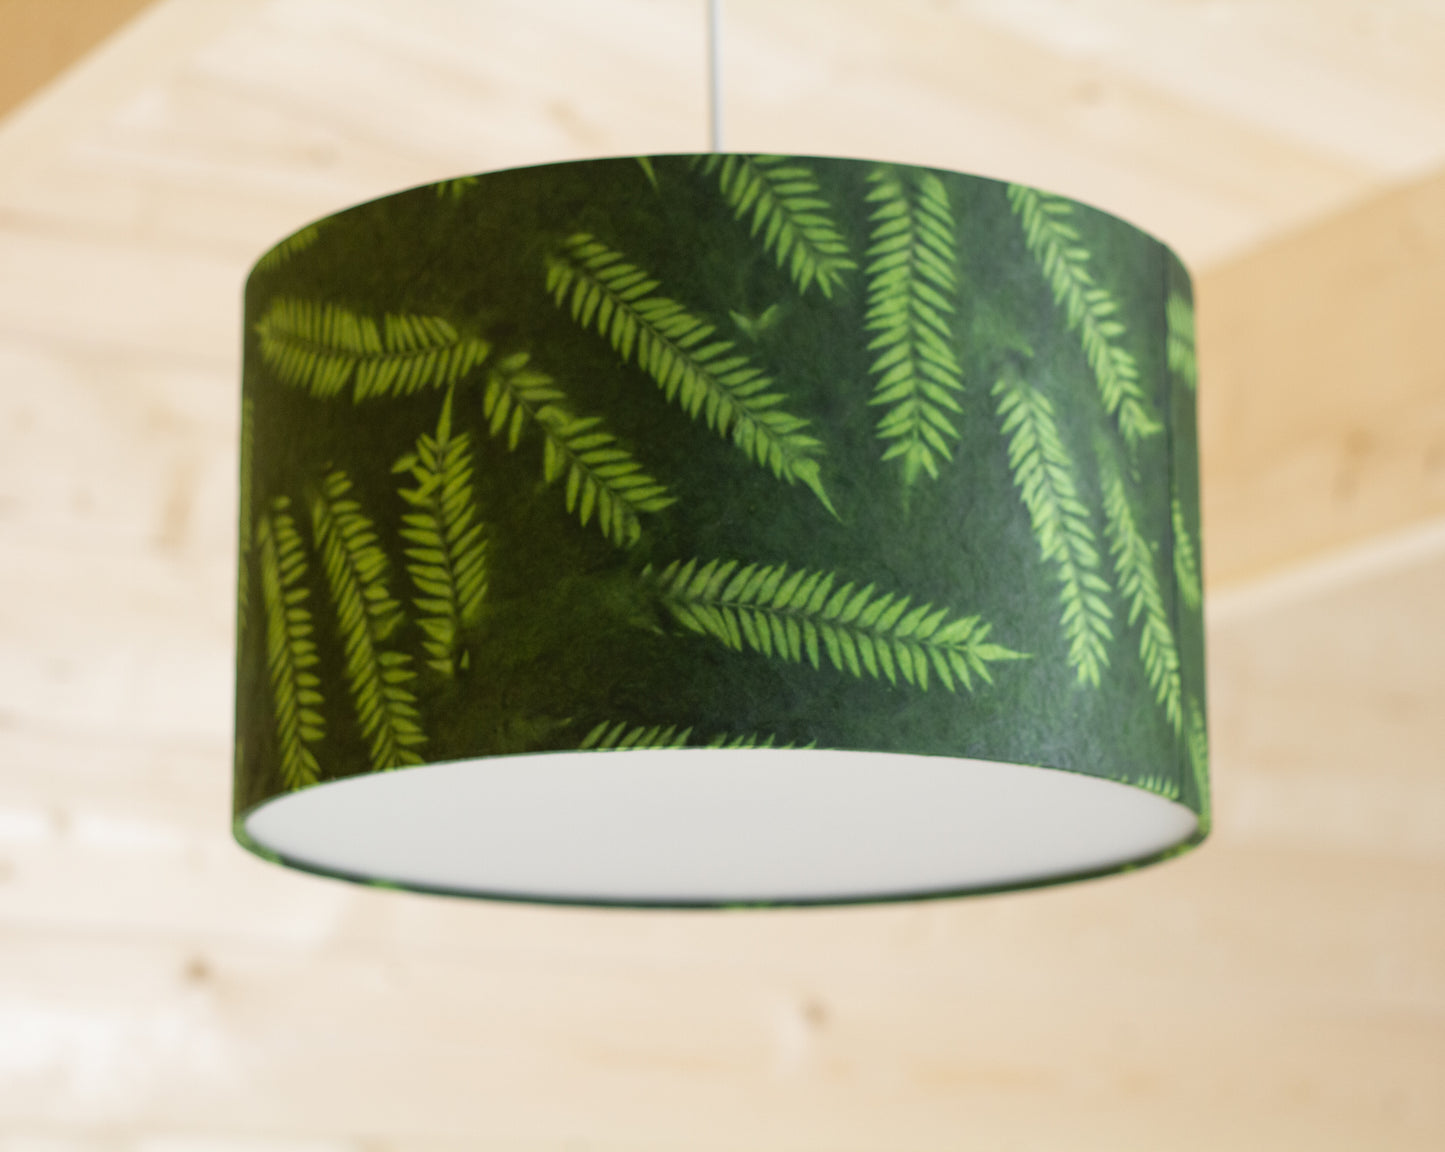 Drum Lamp Shade - P27 - Resistance Dyed Green Fern, 35cm(d) x 20cm(h)